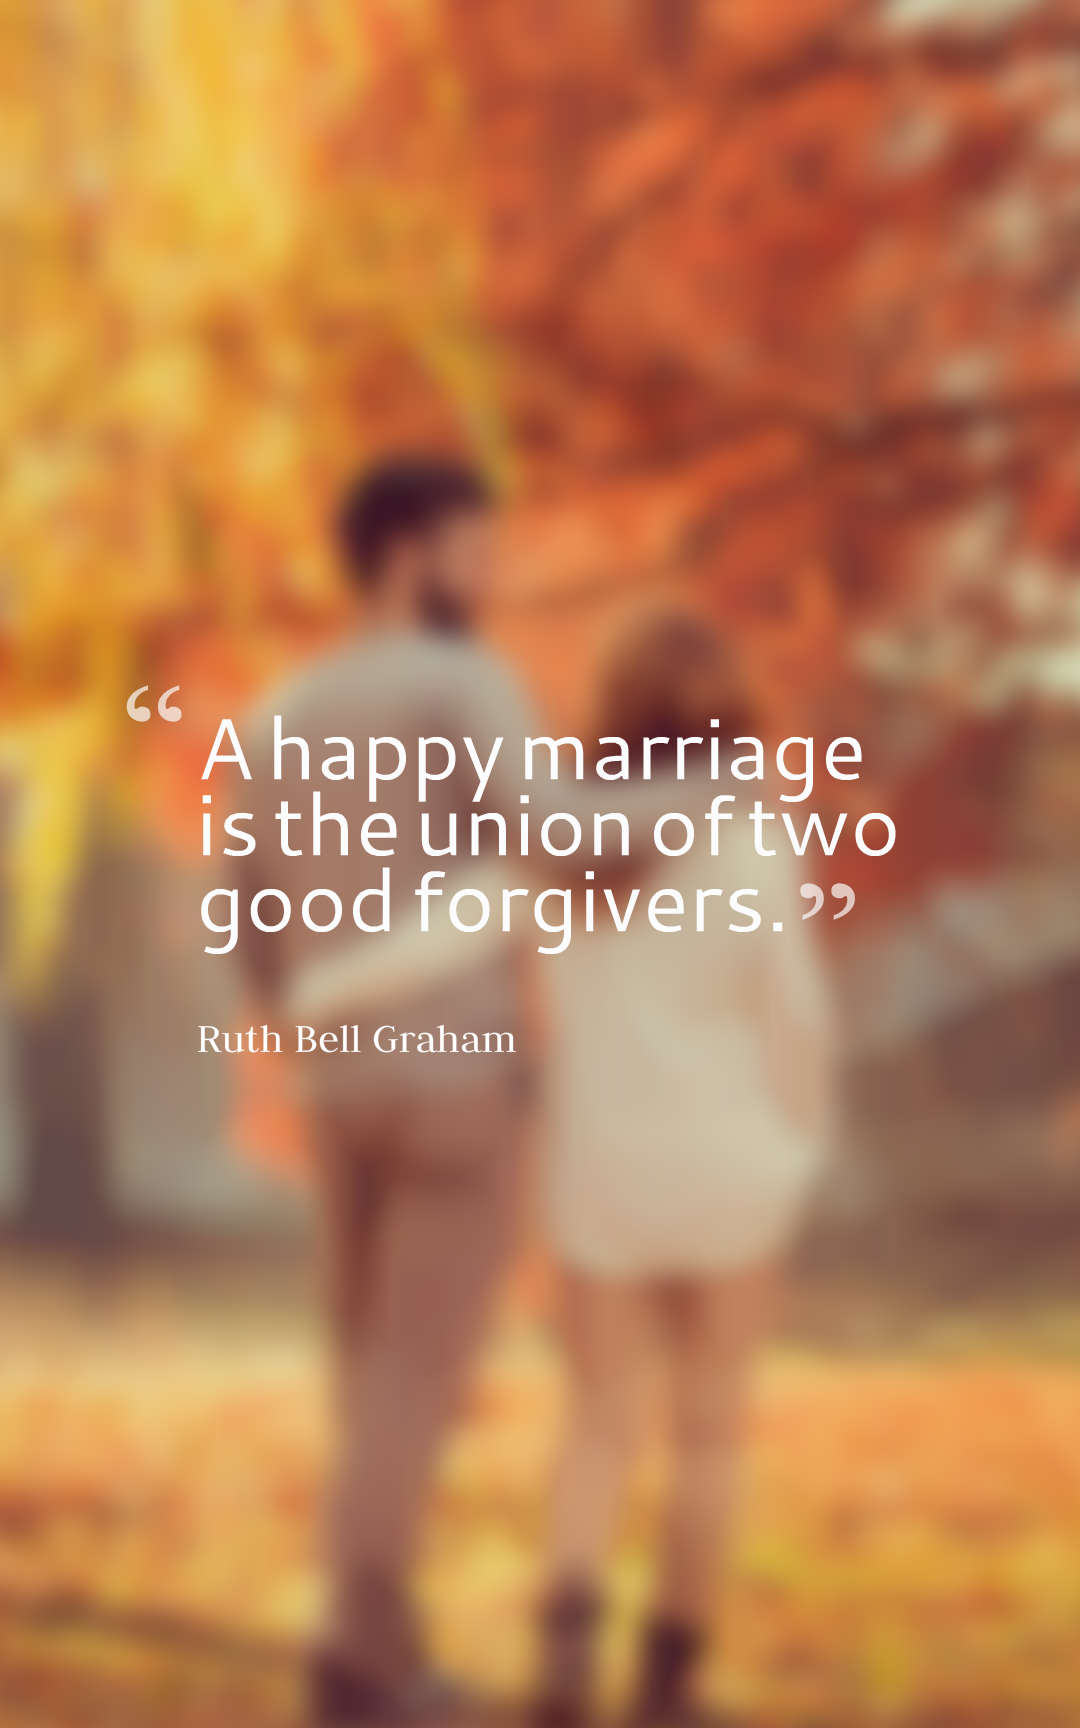 45 Inspirational Marriage Quotes And Sayings With Images